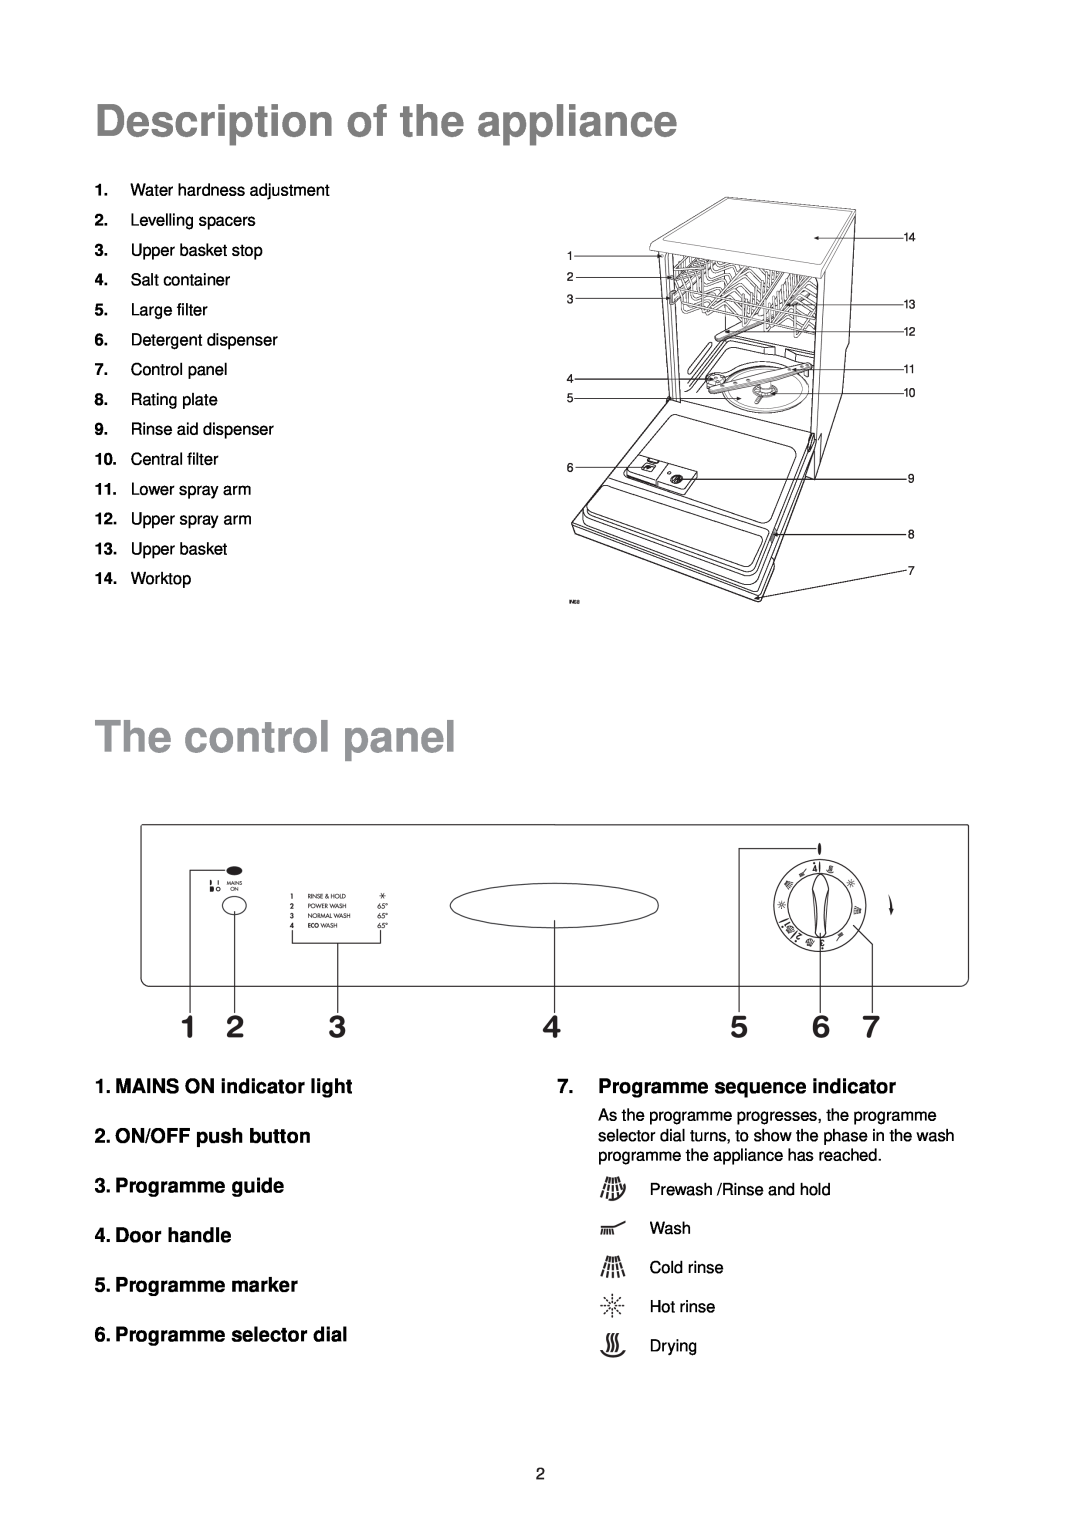 Tricity Bendix CDW 101 manual Description of the appliance, The control panel, Programme sequence indicator 